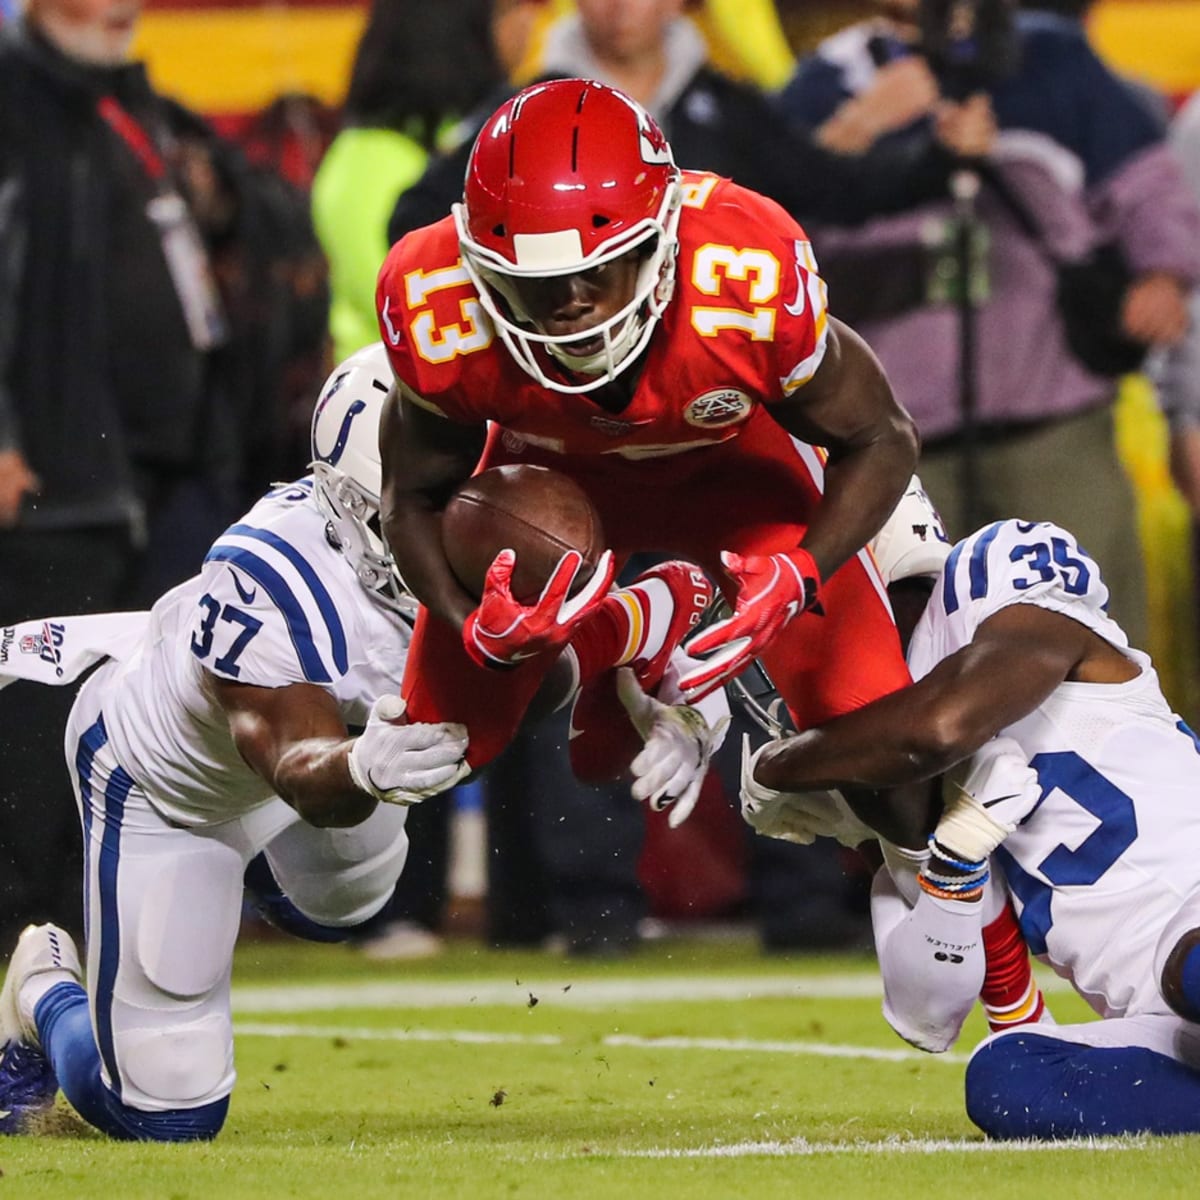 Byron Pringle Latest Kansas City Chiefs Receiver with Big Day Despite 19-13  Loss to IndianapolisColts - Sports Illustrated Kansas City Chiefs News,  Analysis and More